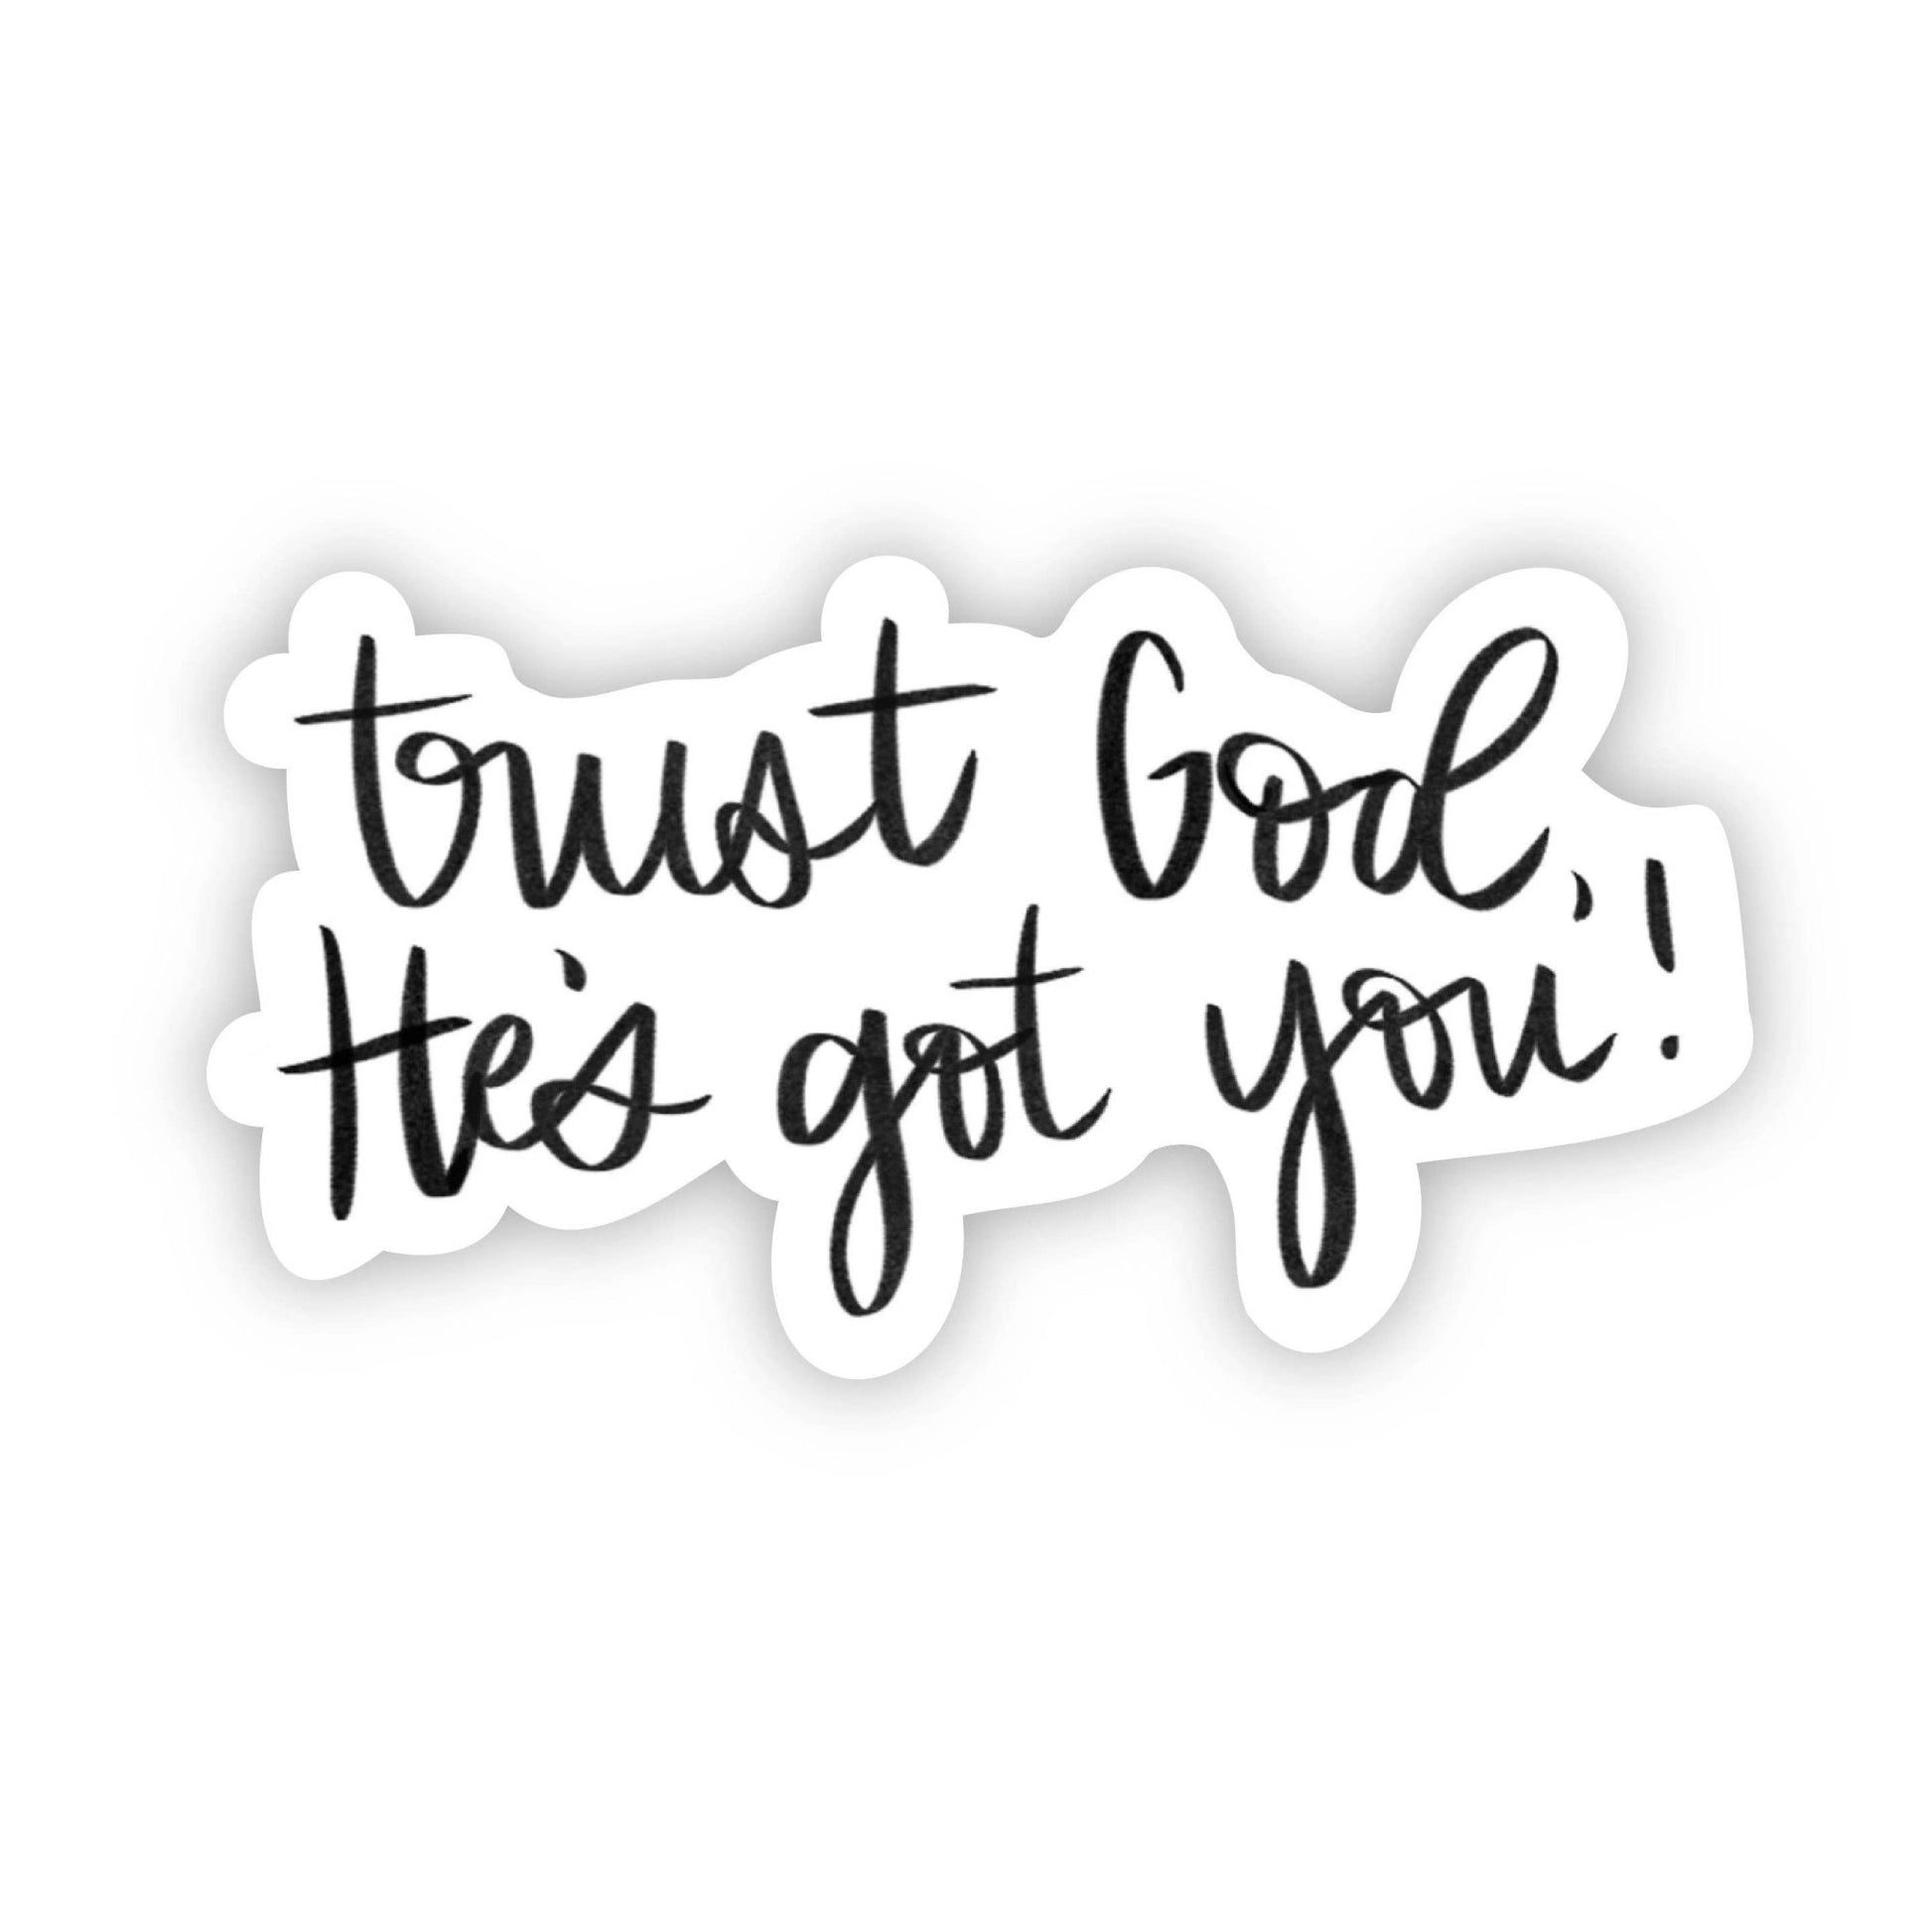 Trust God, He's got you! - [ash-ling] Booksellers